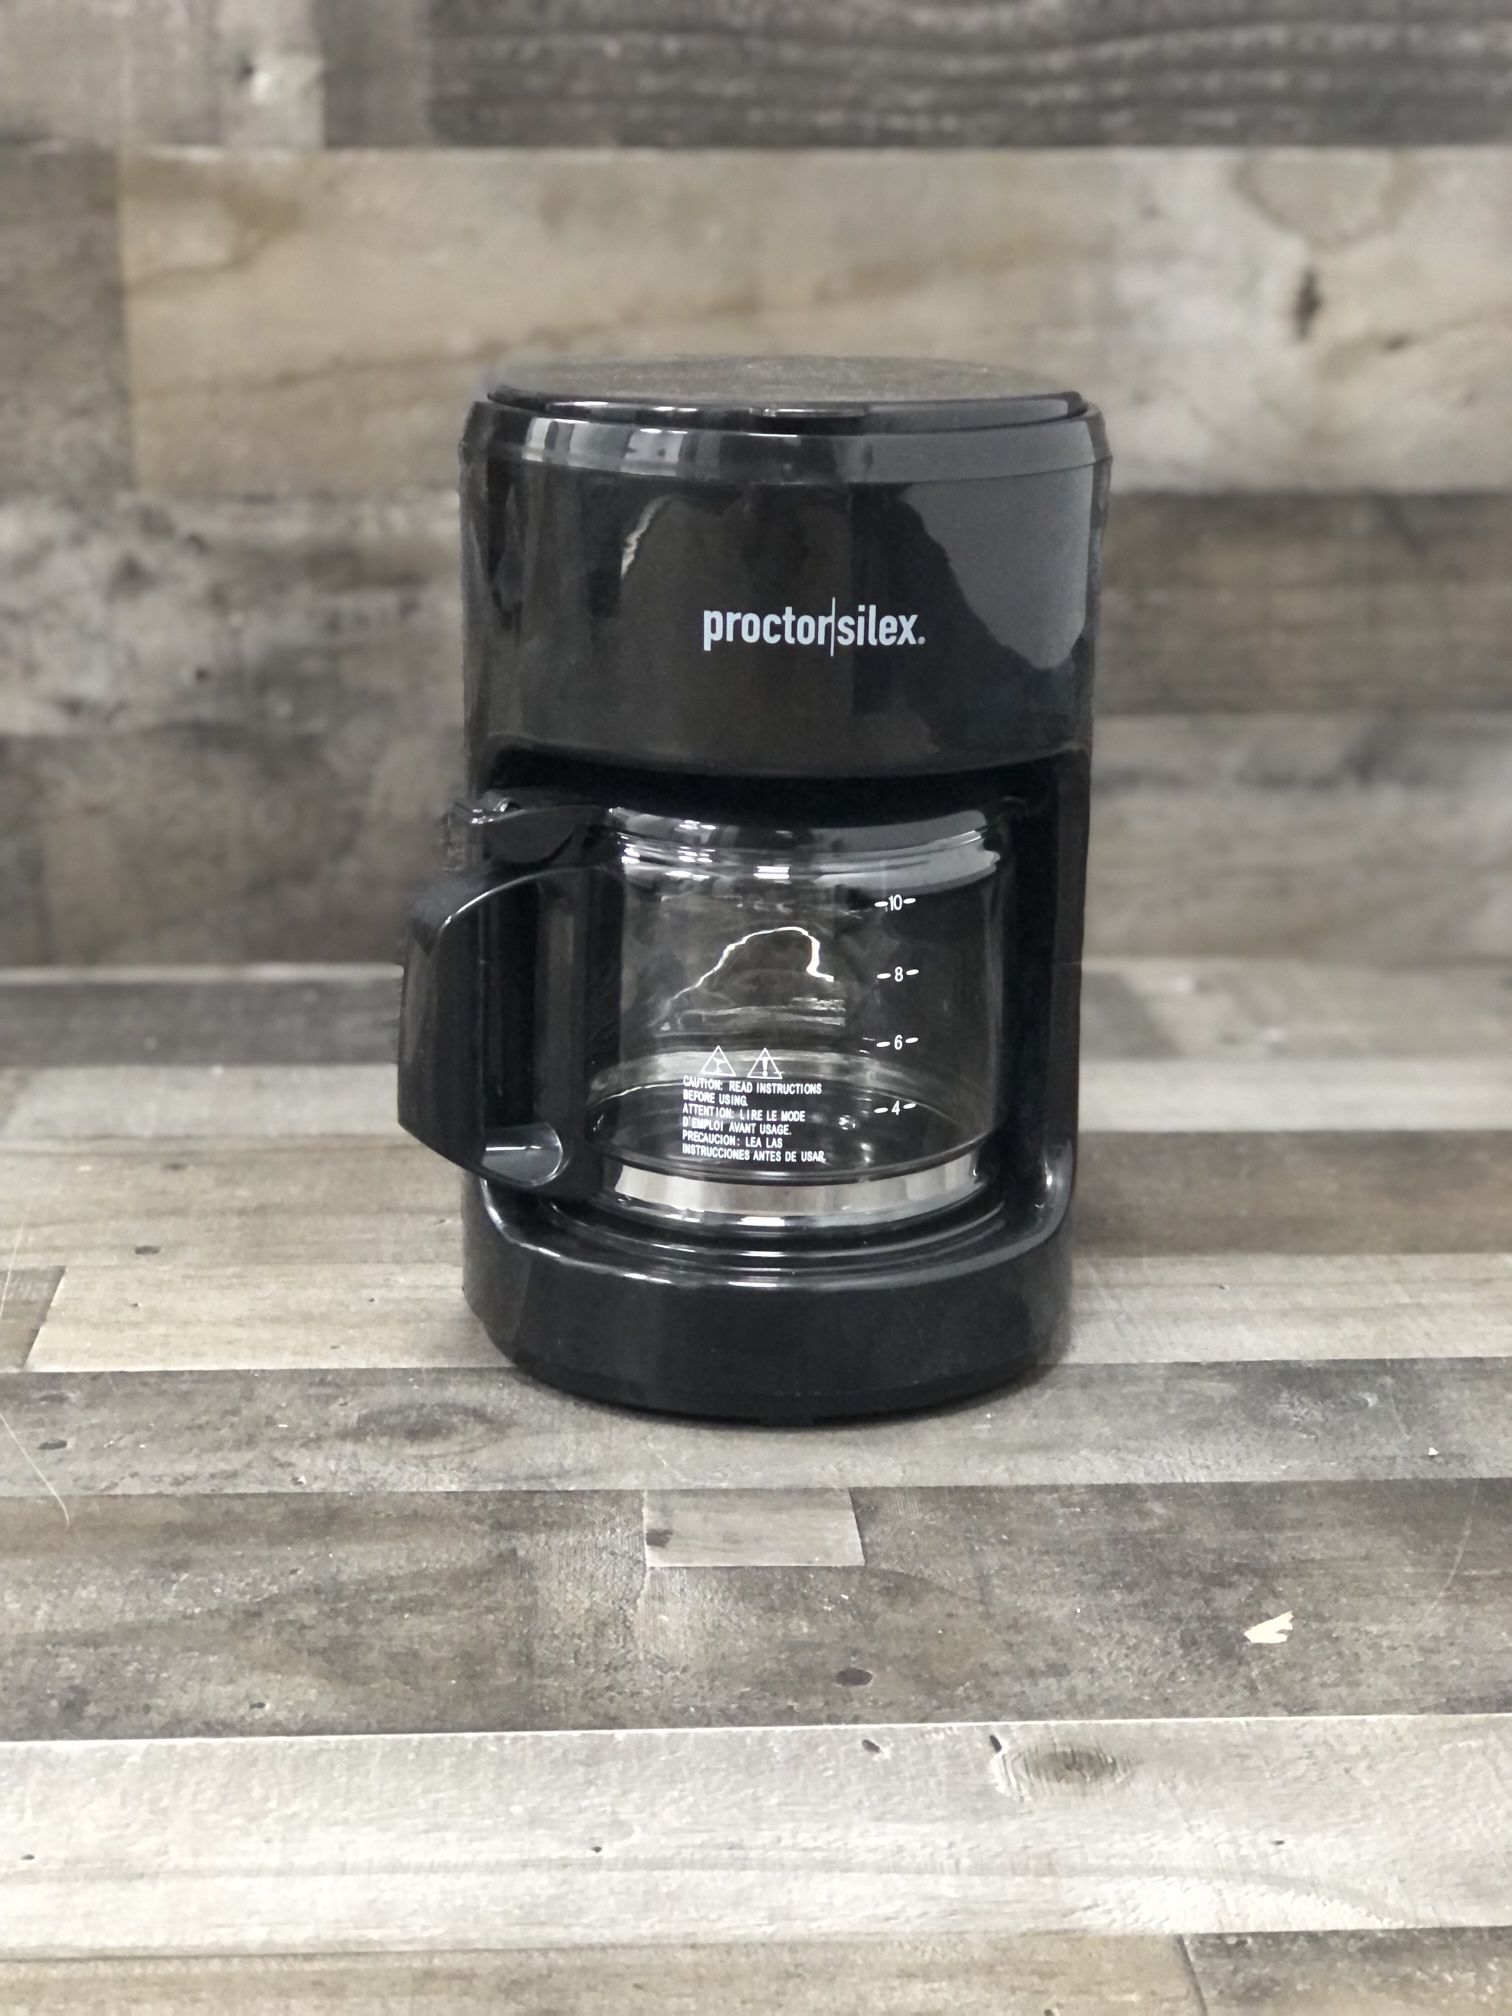 Proctor Silex Coffee Maker, Works with Smart Plugs That are Compatible with Alexa, Auto Pause and Serve, 10-Cup, Black